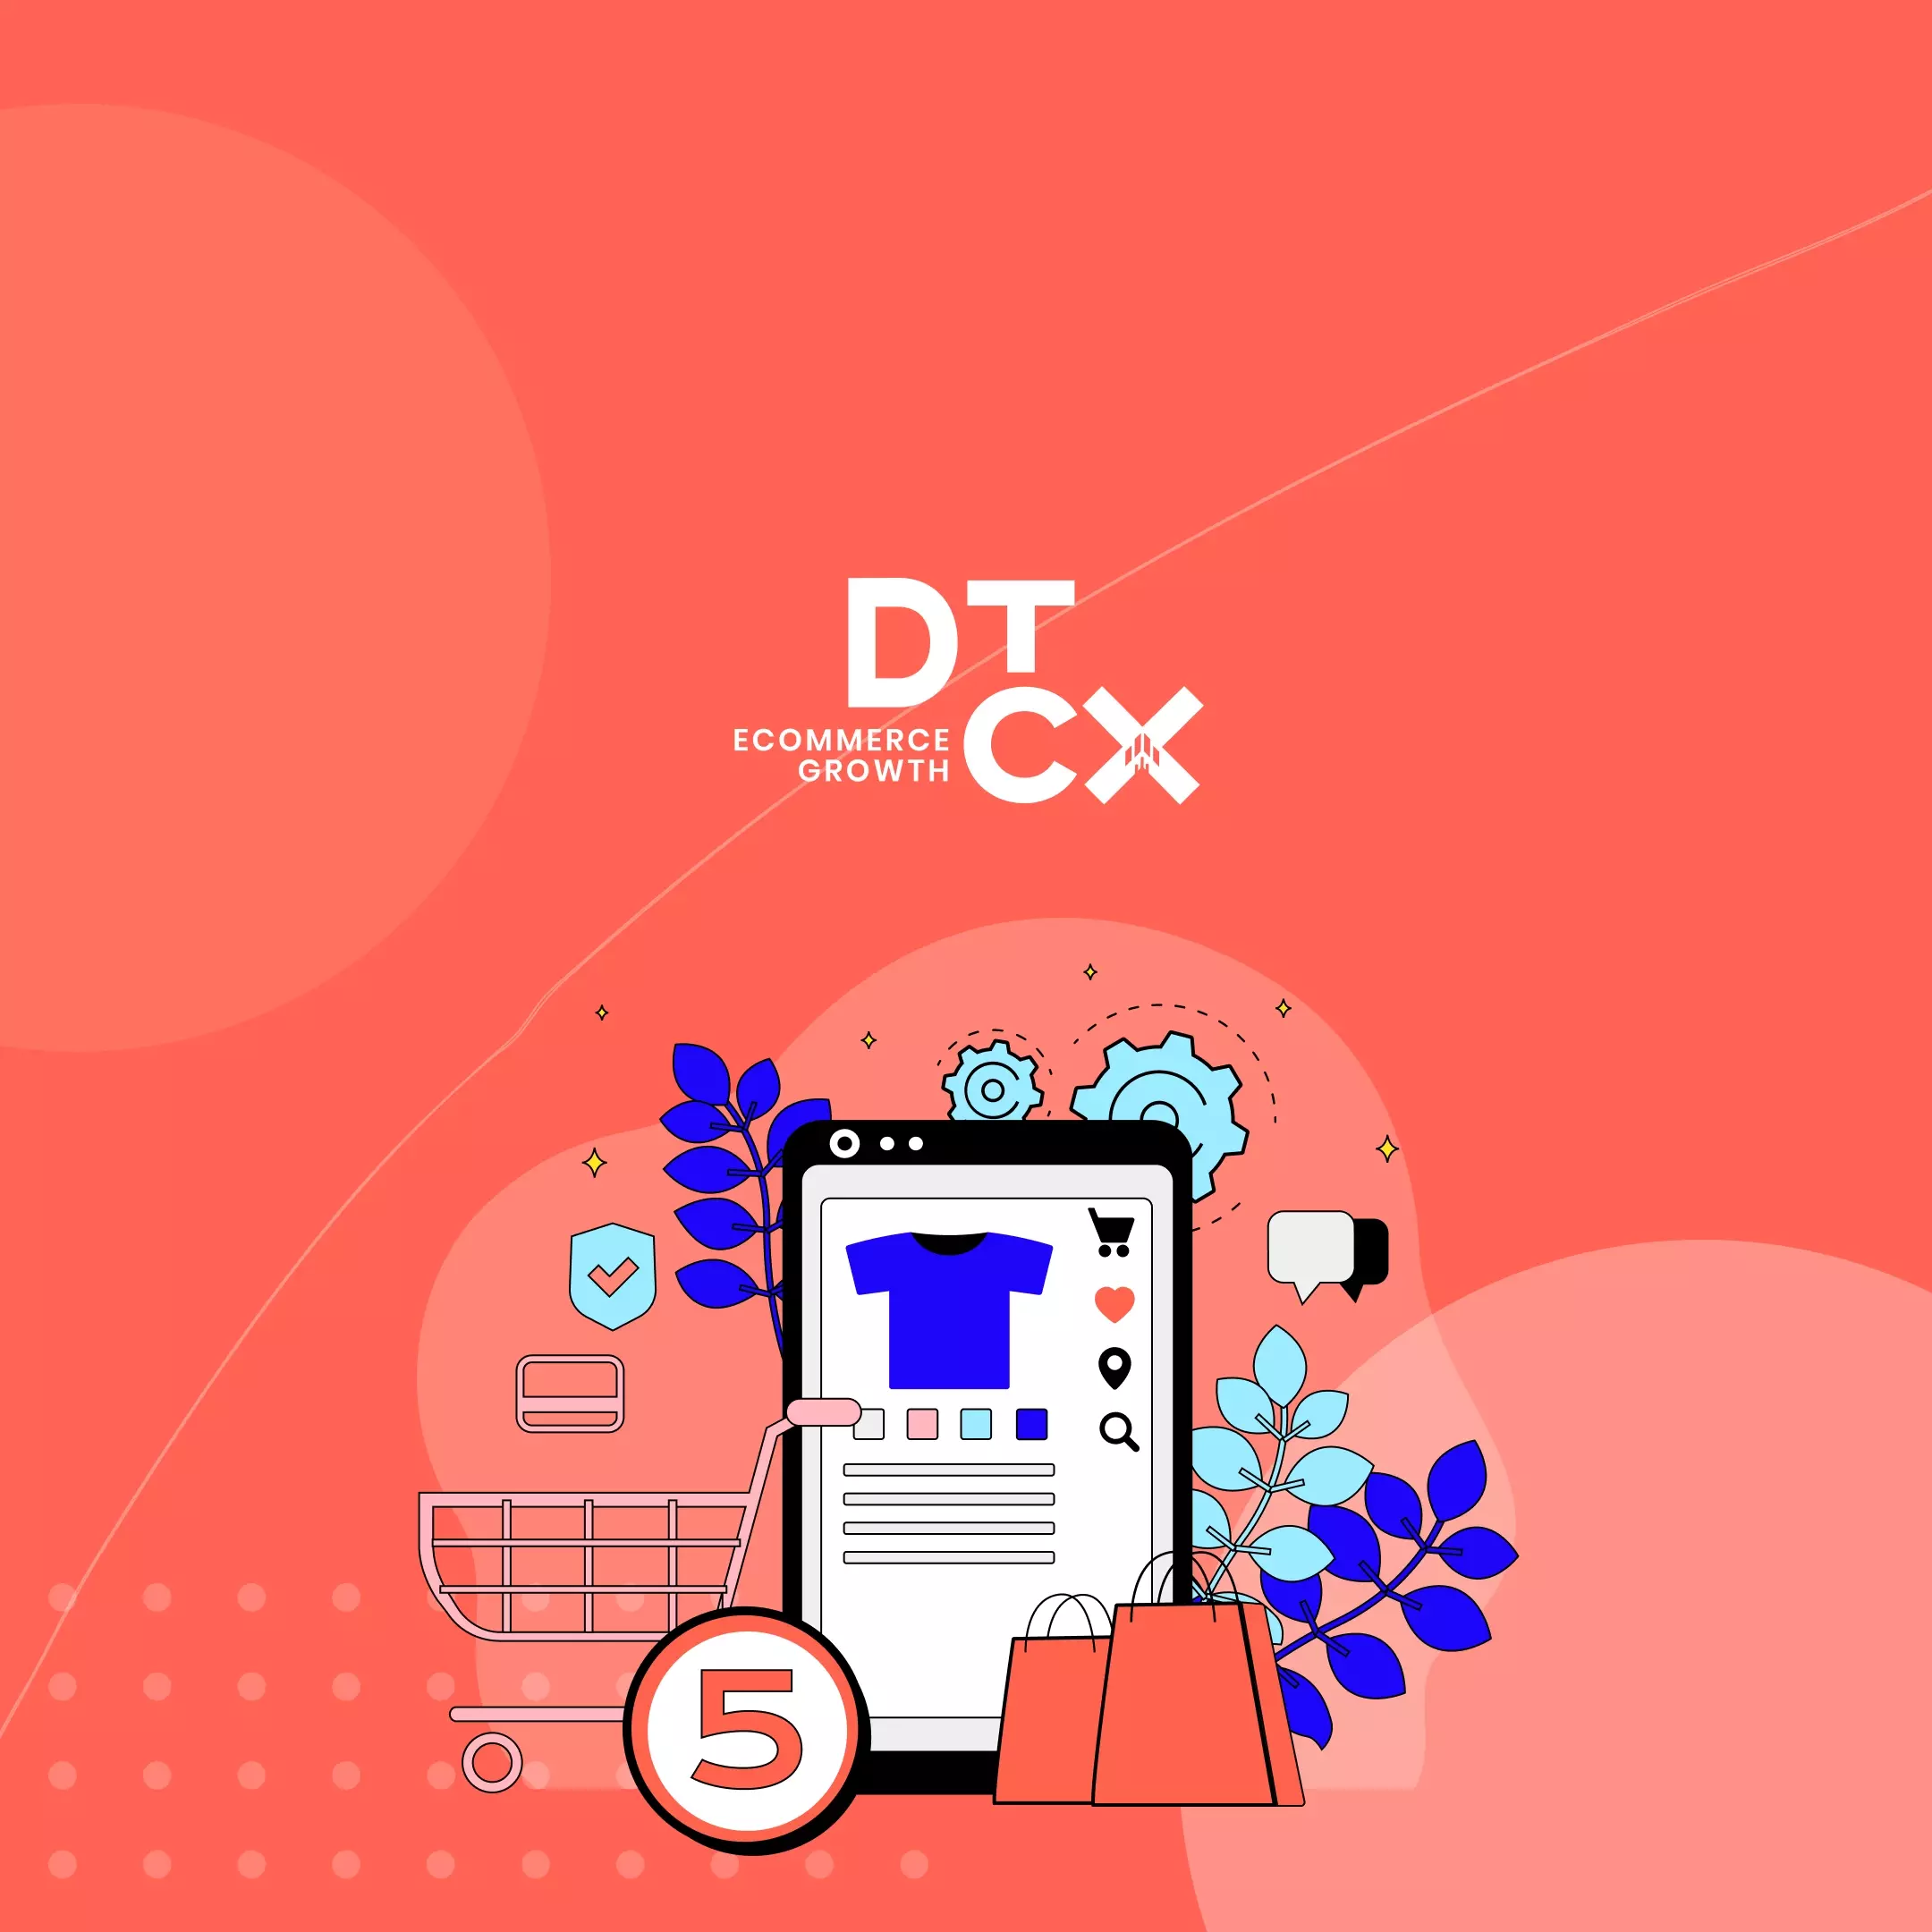 DTCX Ecommerce Growth title image with animation images referencing online shopping